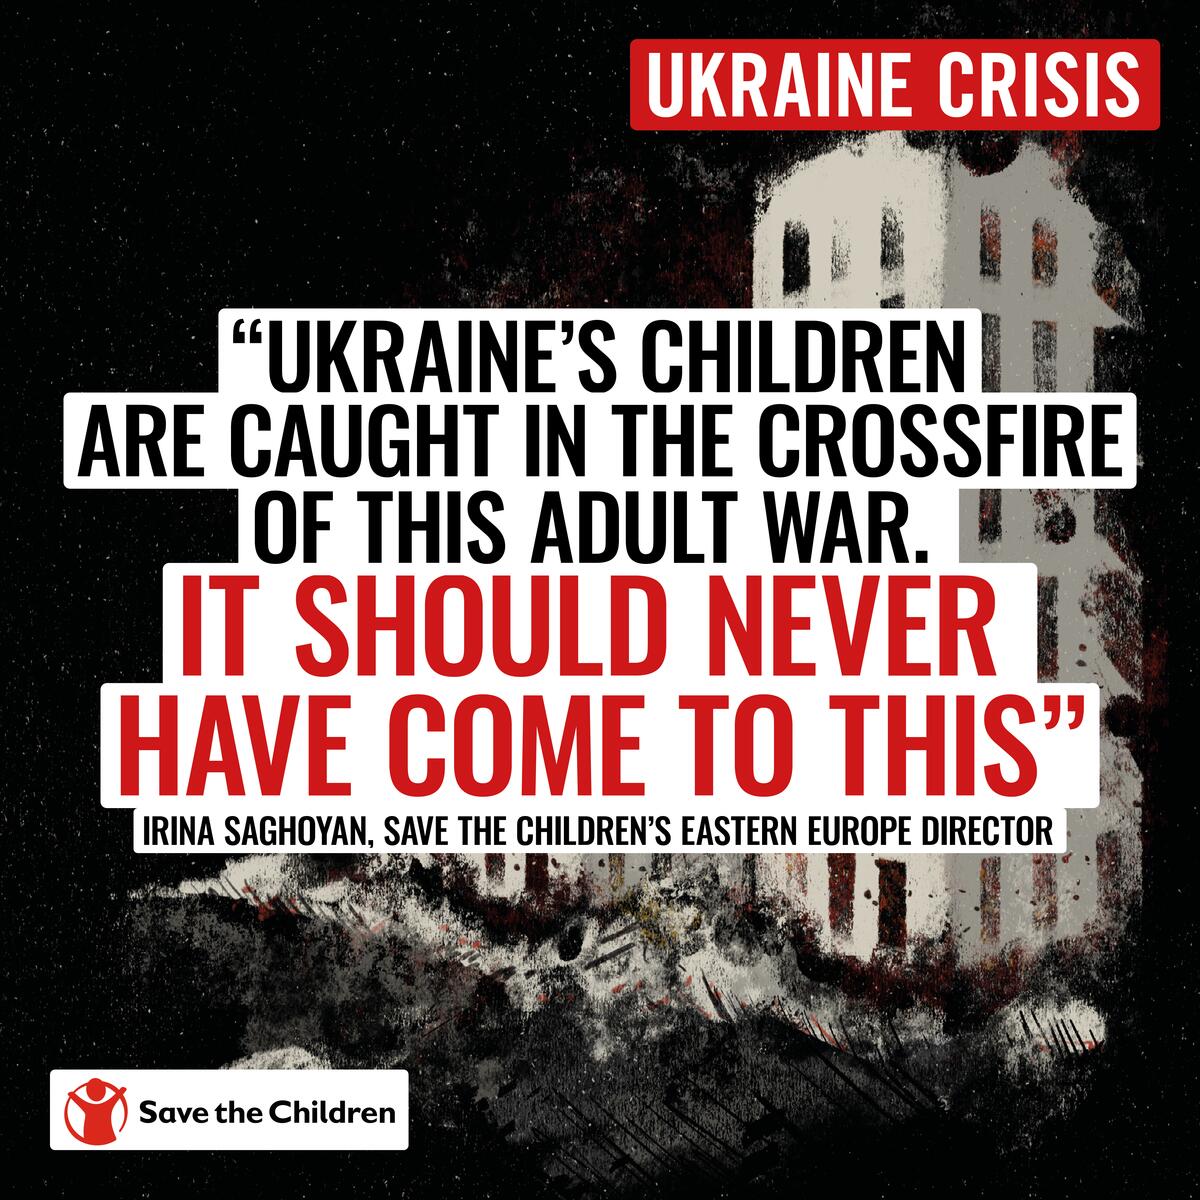 Save the Children Canada on Twitter: "The hostilities across #Ukraine are putting 7.5 million children at risk. No child should have to grow up in violence. #Stopthewaronchildren Click here to support children